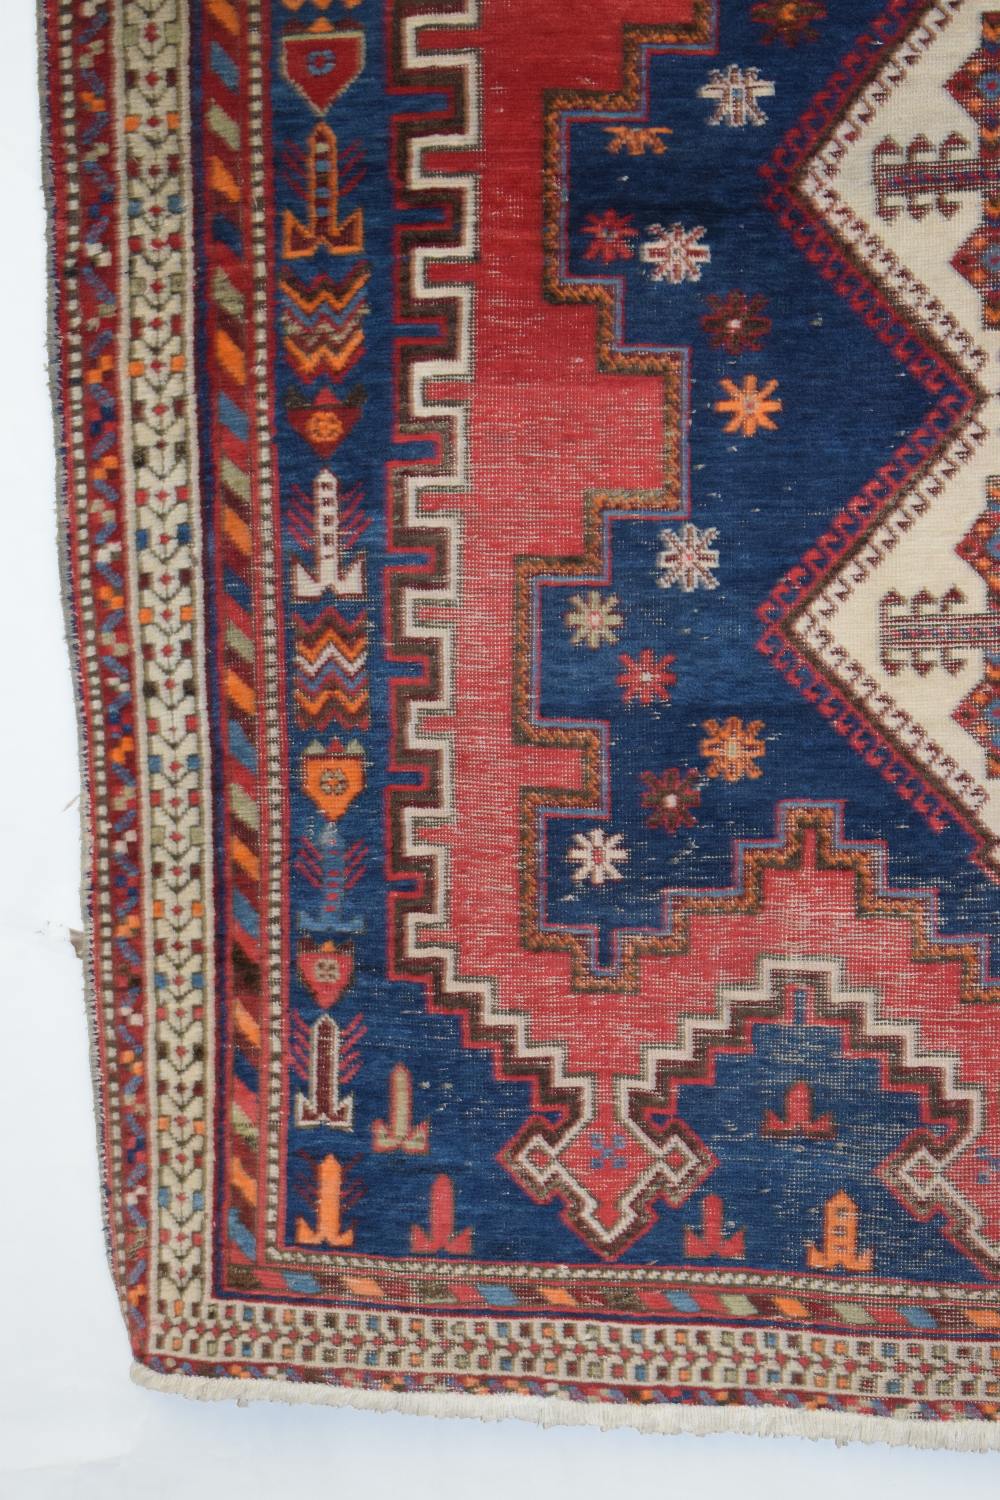 Afshar rug, Kerman area, south east Persia, circa 1930s-40s, 6ft. 8in. X 5ft. 1in. 2.03m. X 1.55m. - Image 5 of 9